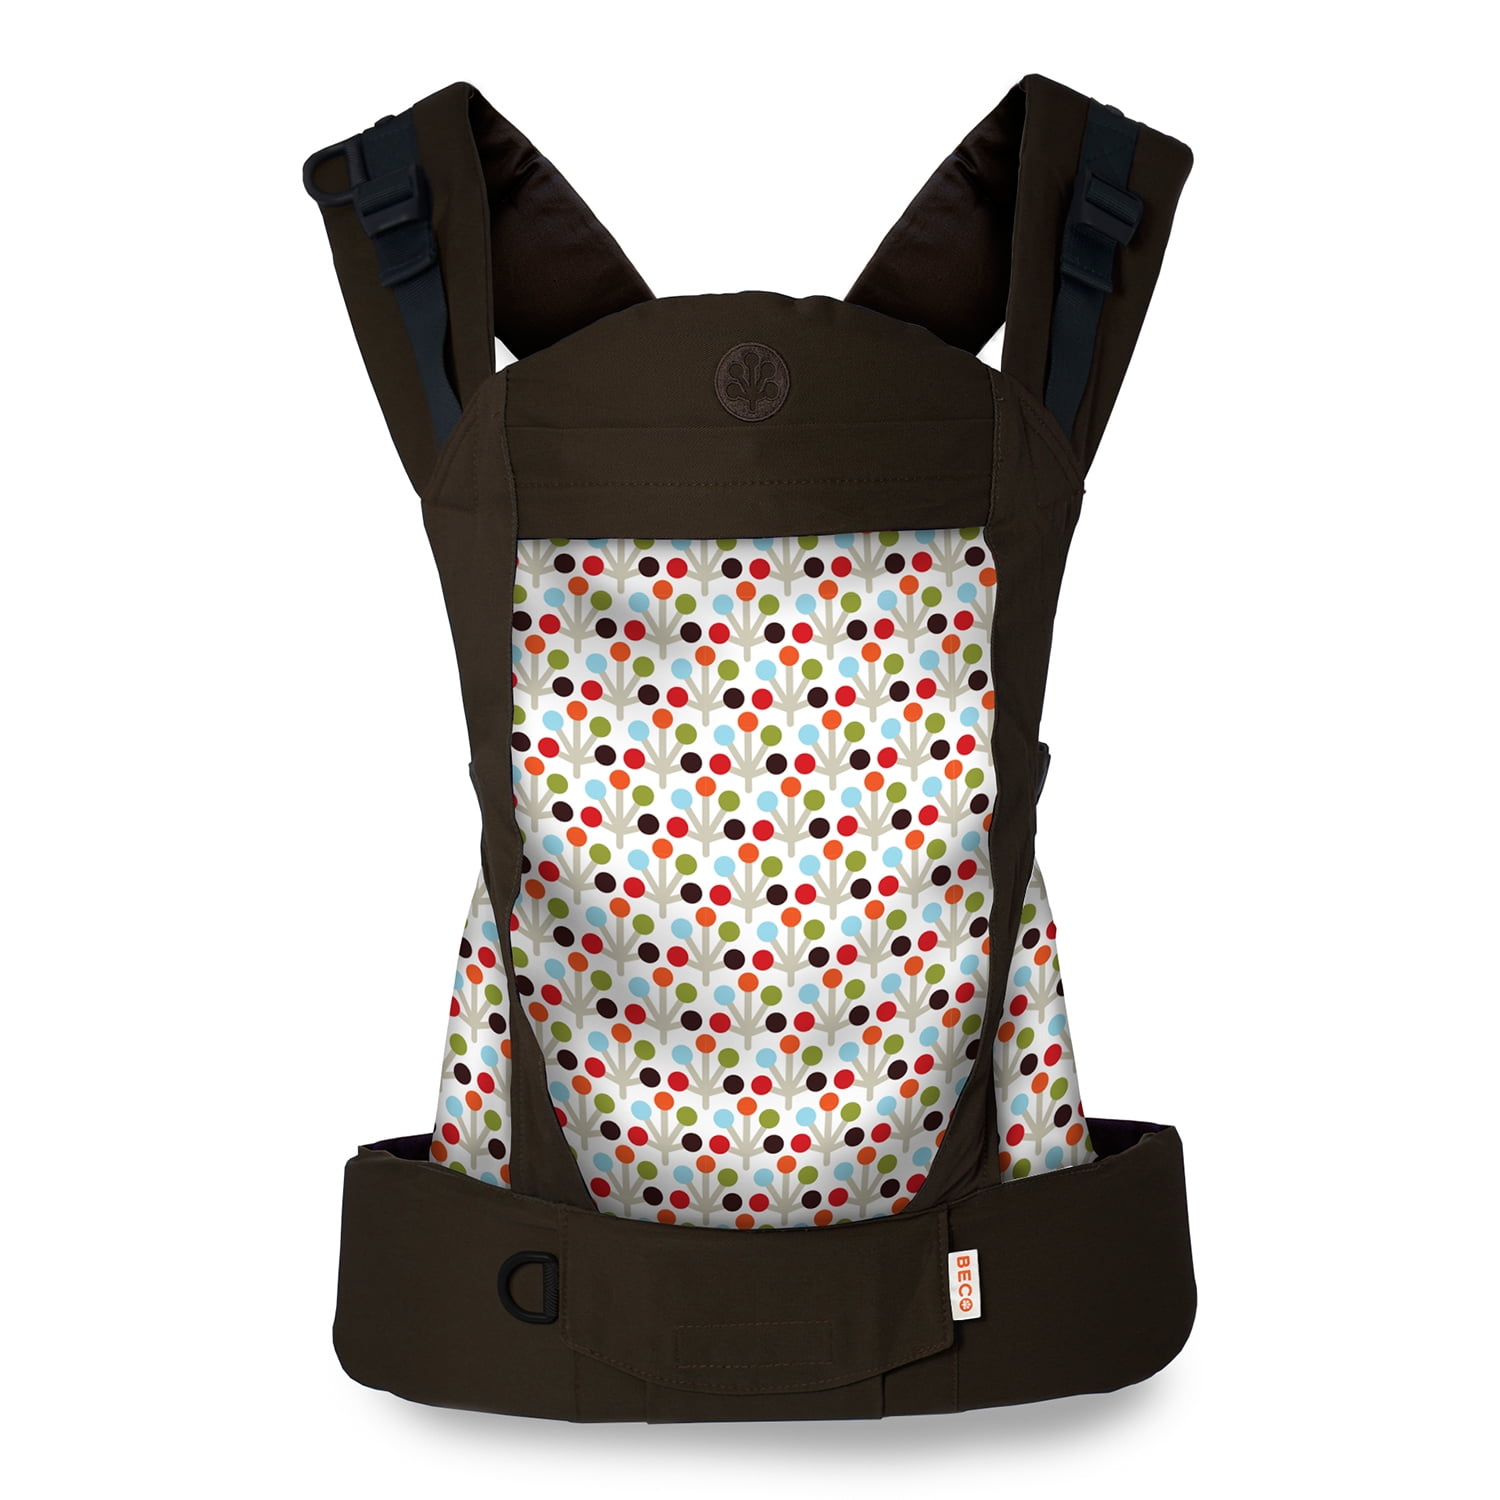 Beco Soleil Baby Carrier - Micah 